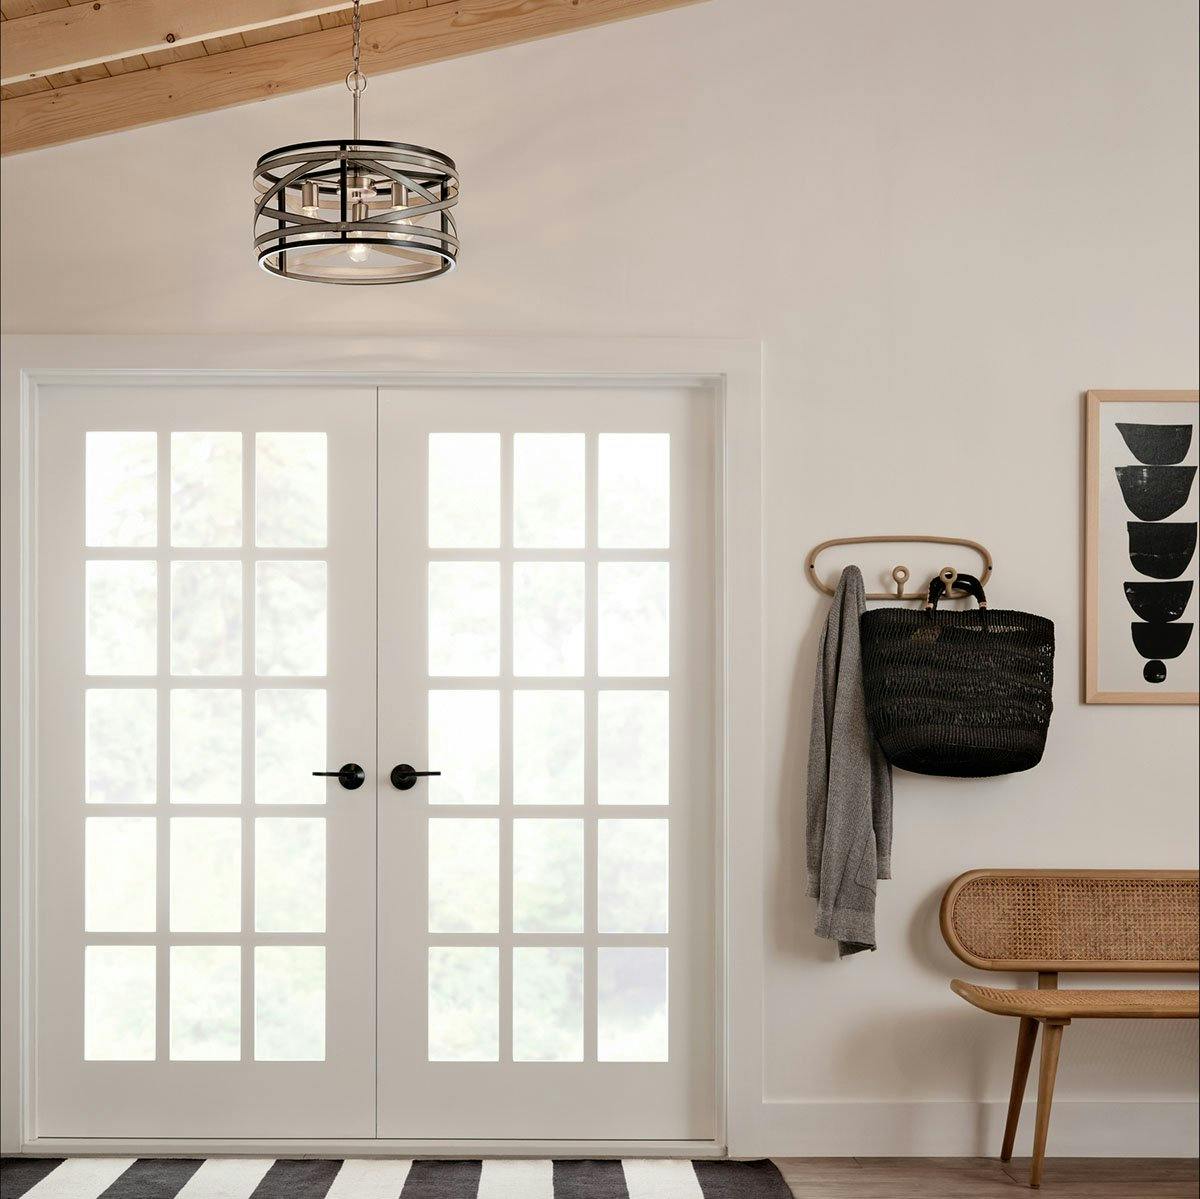 Day time Entrance image featuring Stetton pendant 82347